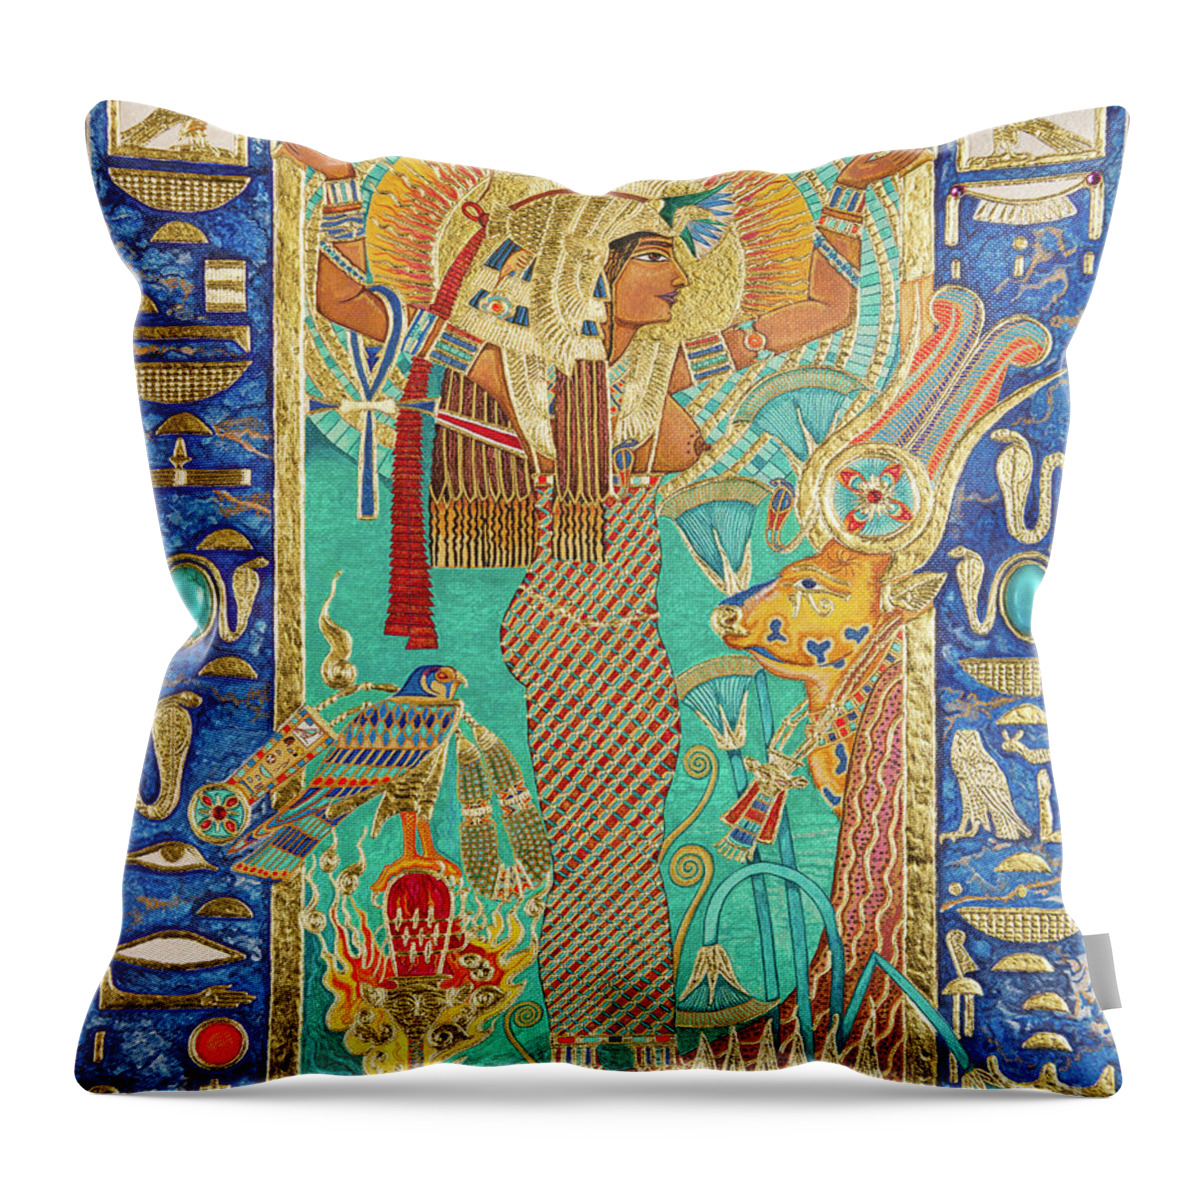 Hwt-her Throw Pillow featuring the mixed media Hwt-Her Mistress of the Sky by Ptahmassu Nofra-Uaa